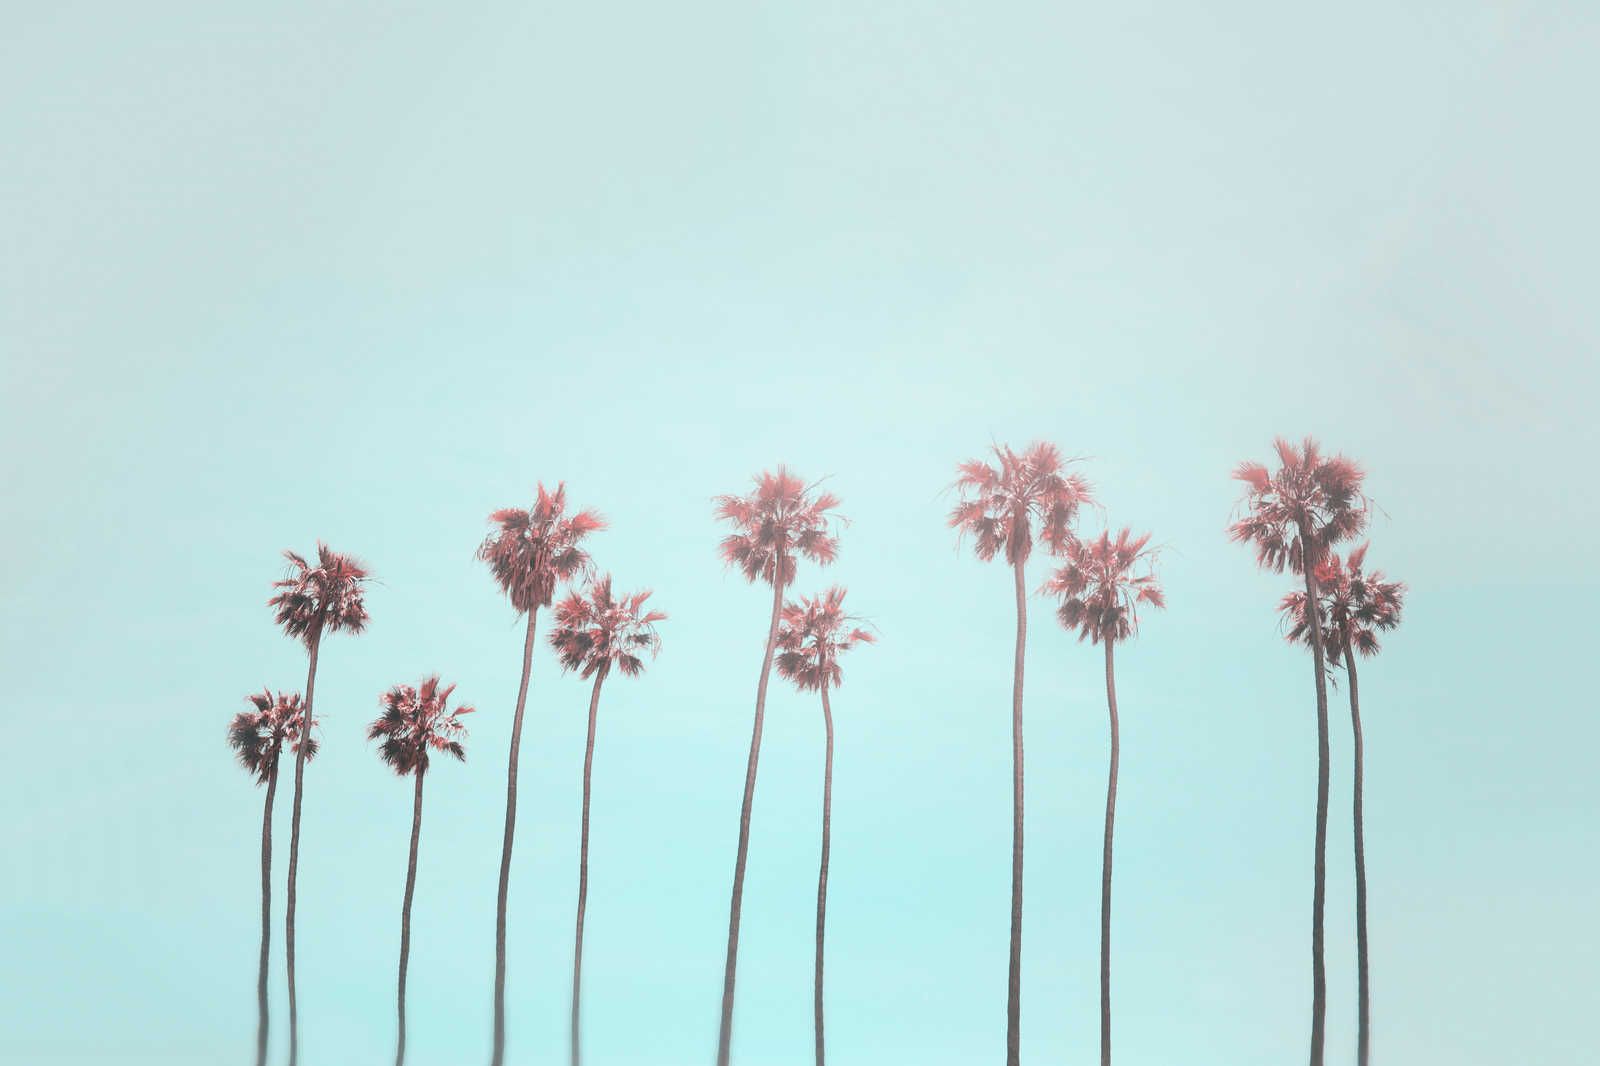             Canvas painting Palm Trees & Sky for Beach Feeling in Turquoise & Pink - 0,90 m x 0,60 m
        